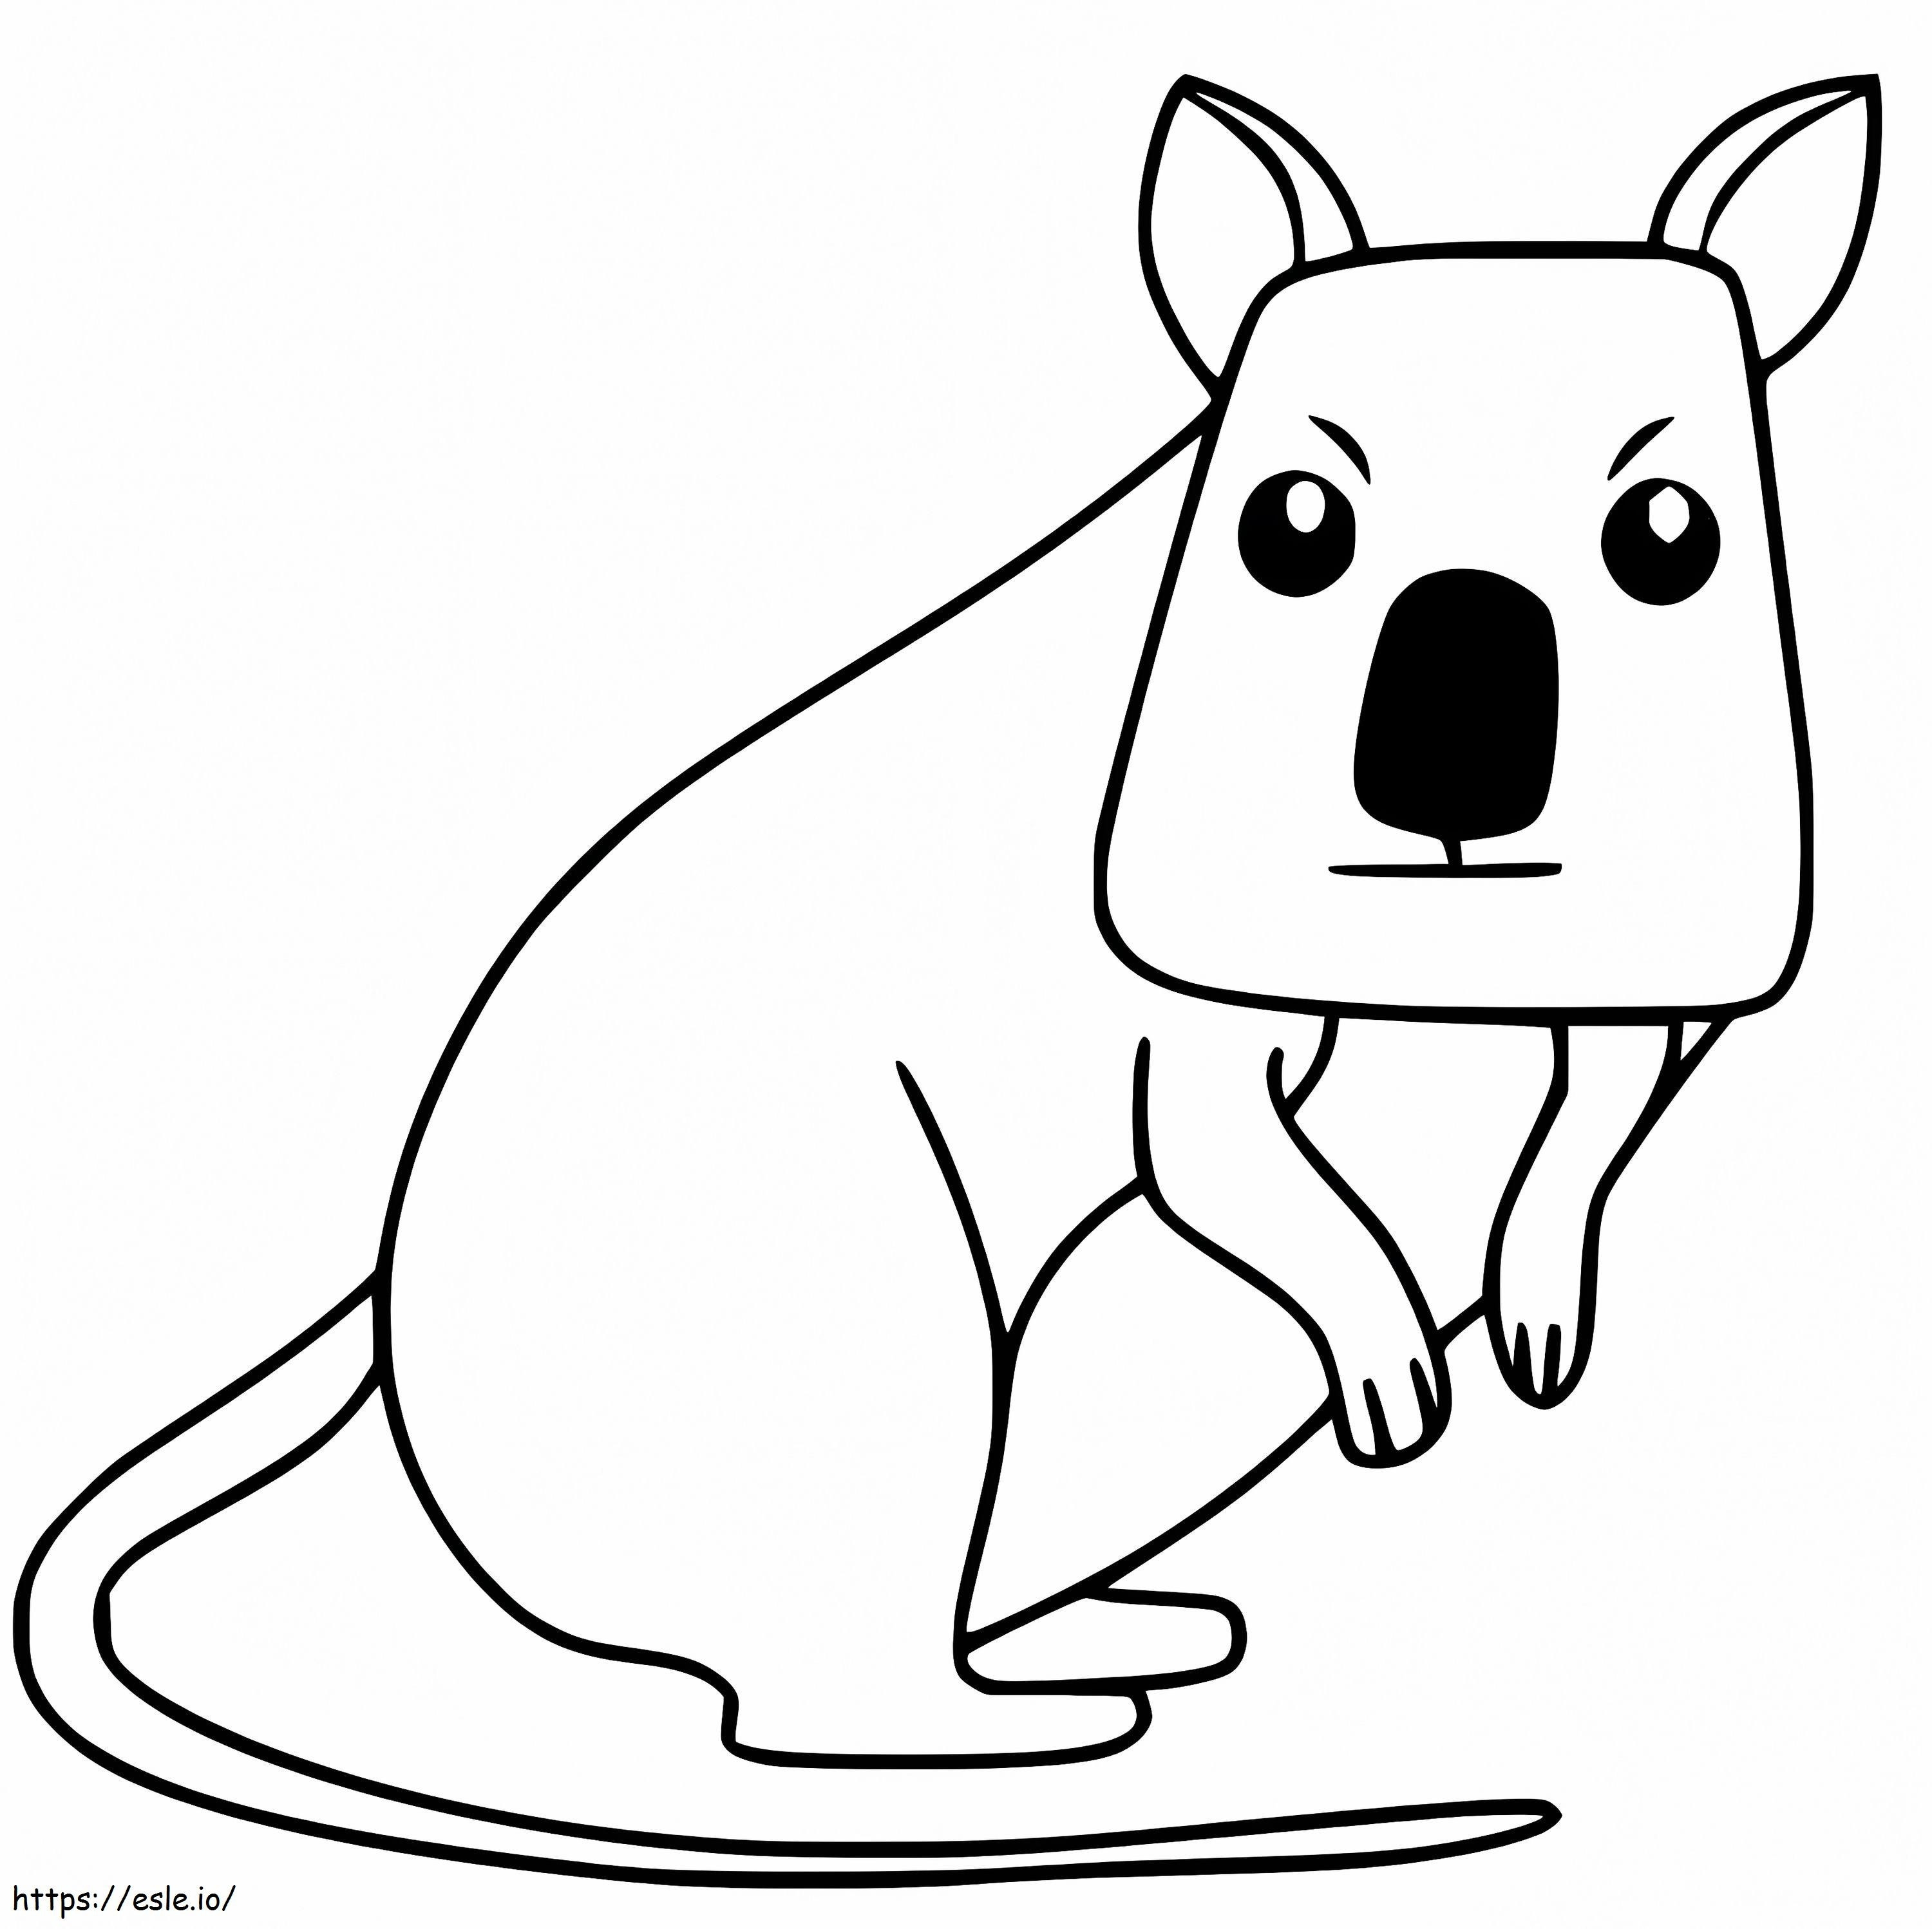 Funny Quokka coloring page